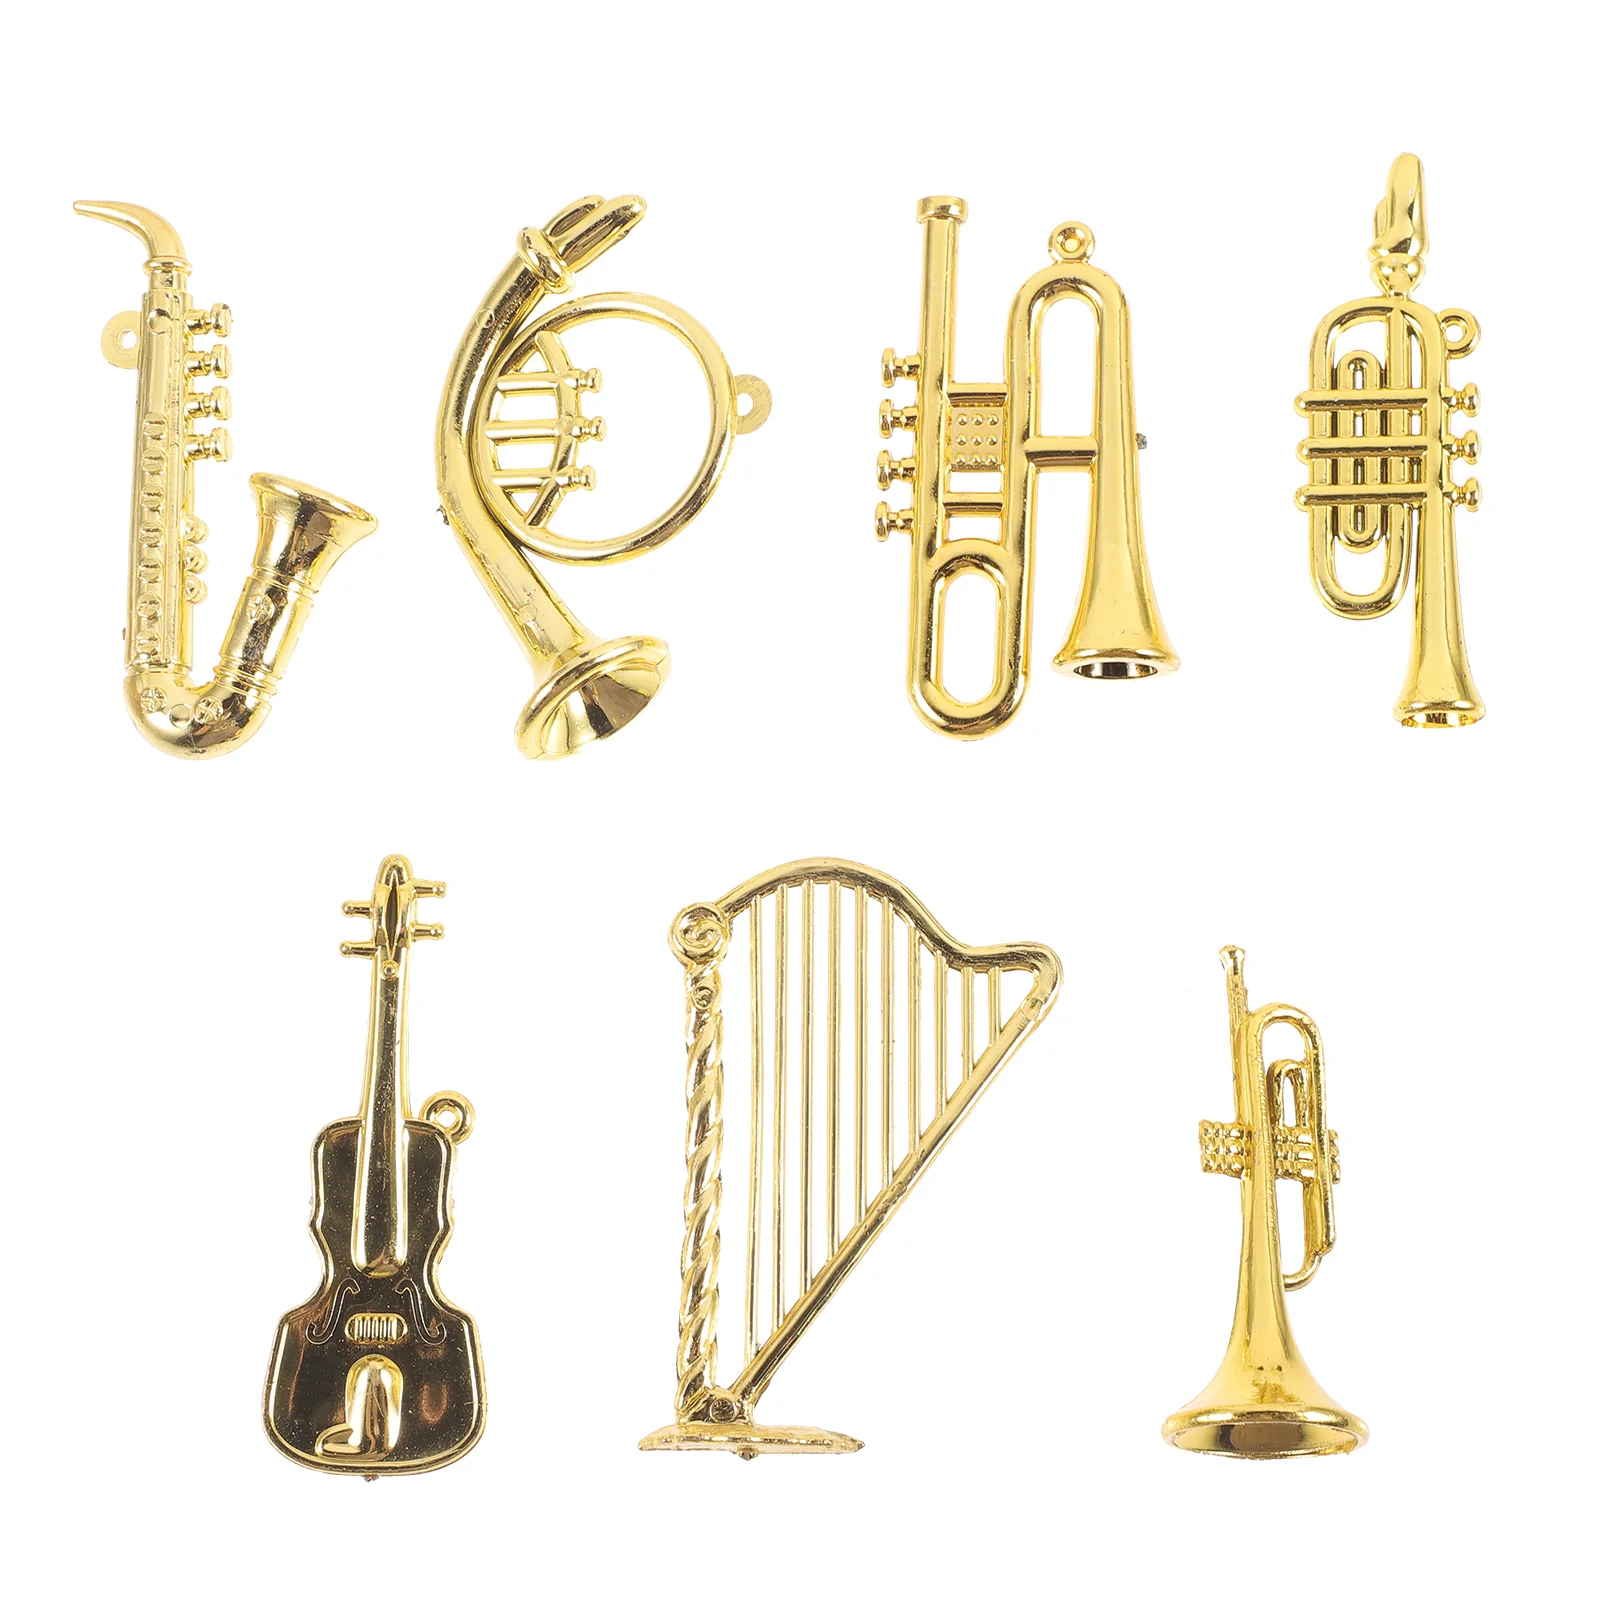 Miniature Instruments Model Festival Christmas Tree Musical Instrument Ornaments for Crafts DIY